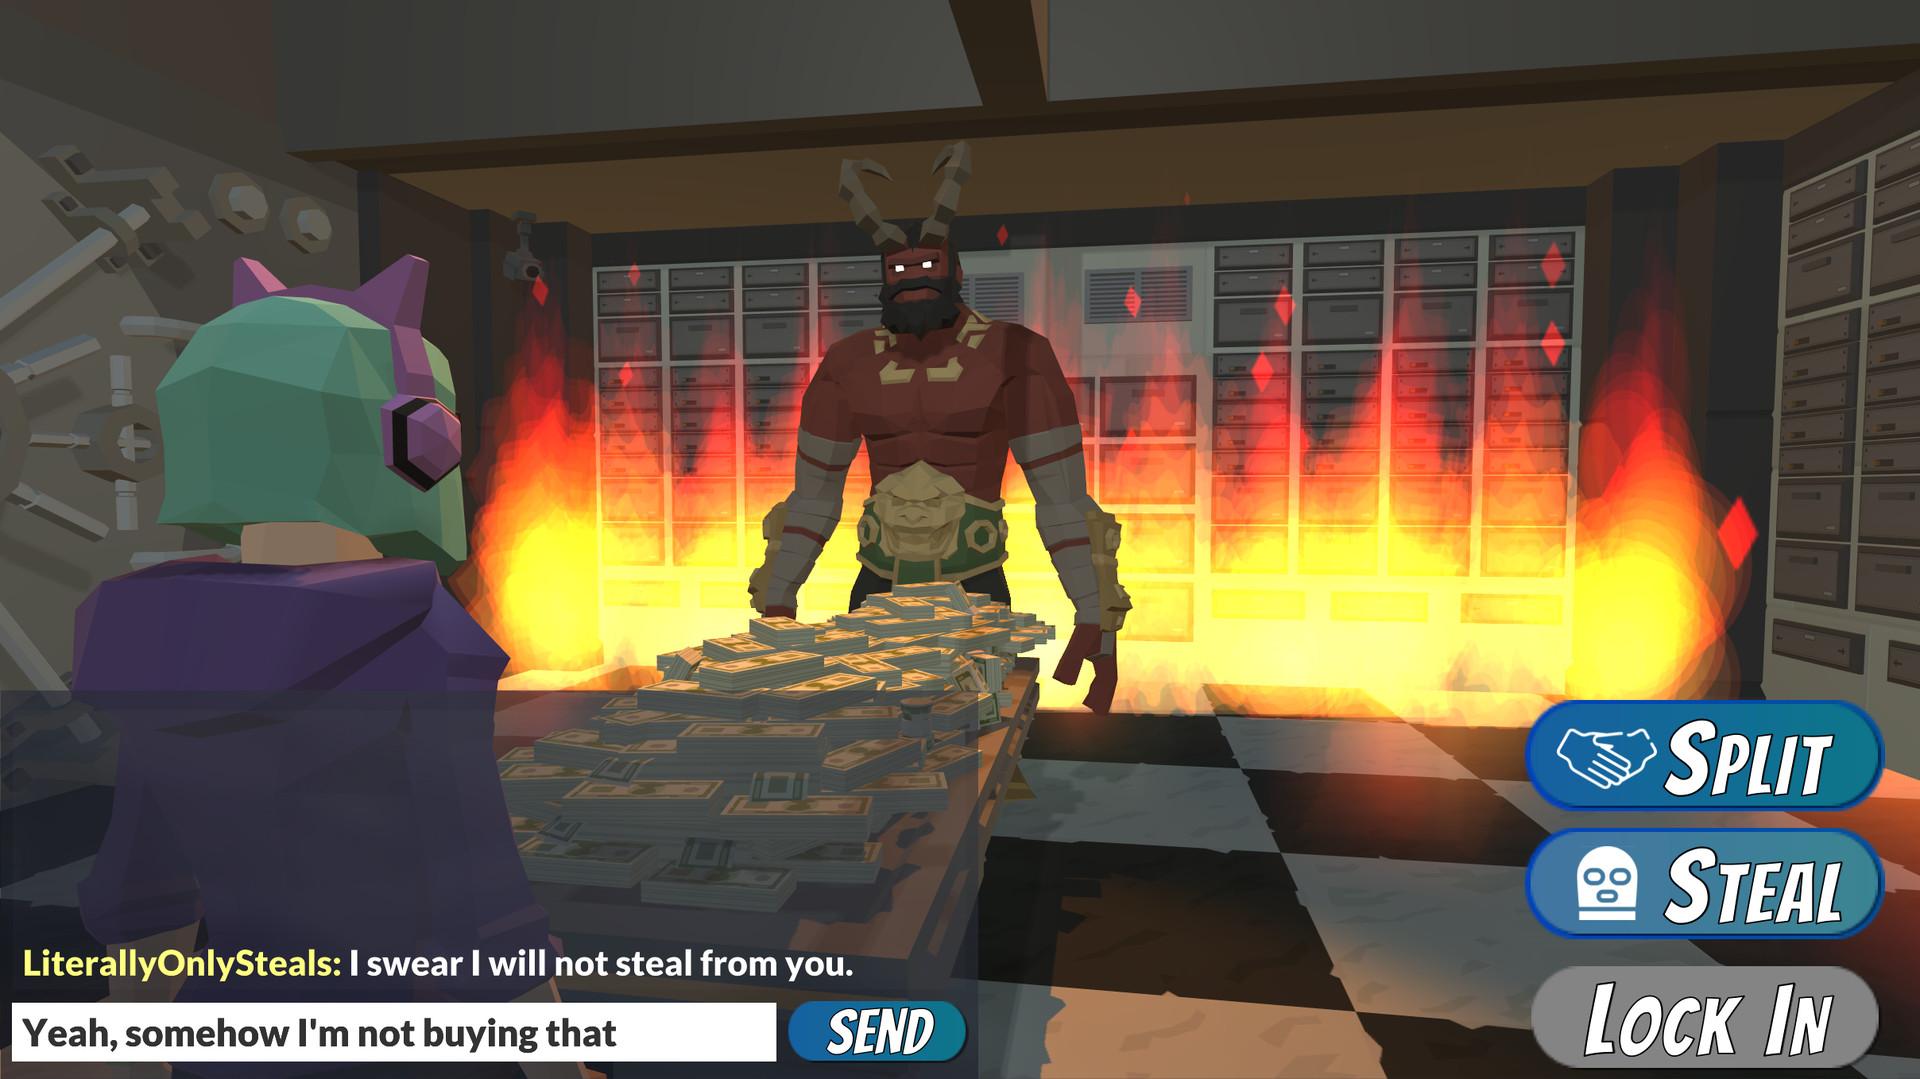 Screenshot №2 from game Split or Steal